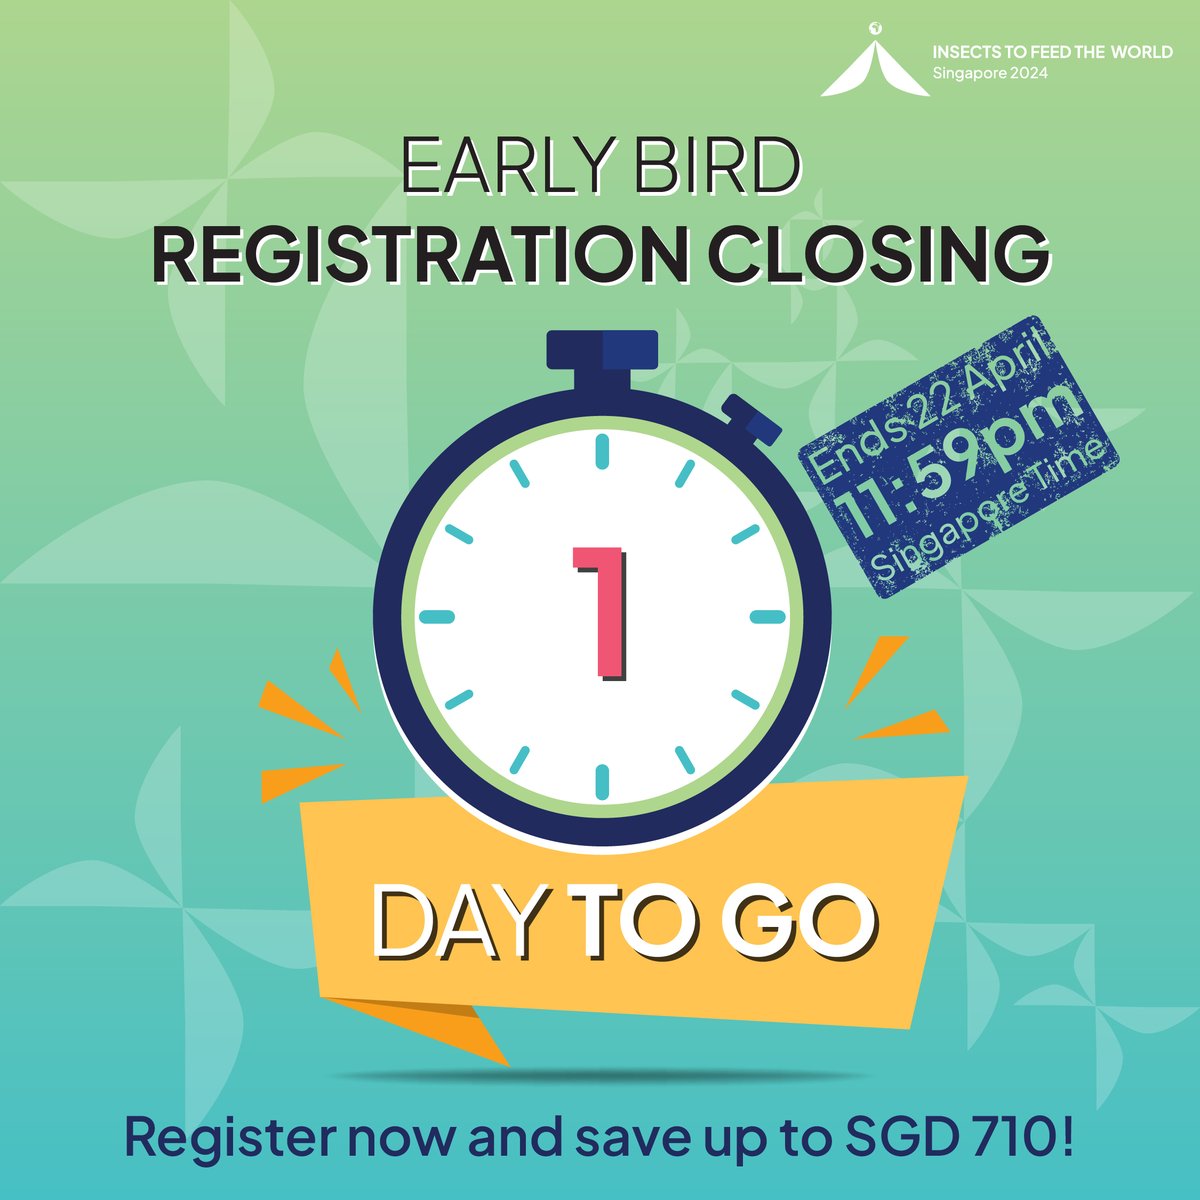 Only 1 day left for early bird registration! Last chance to save on your tickets!
➡bit.ly/47C8TXa

#IFW2024 #Insects #Conference #BSF #mealworm #cricket #silkwork #alternativeProtein #sustainability #earlybirdspecial #RegisterNow